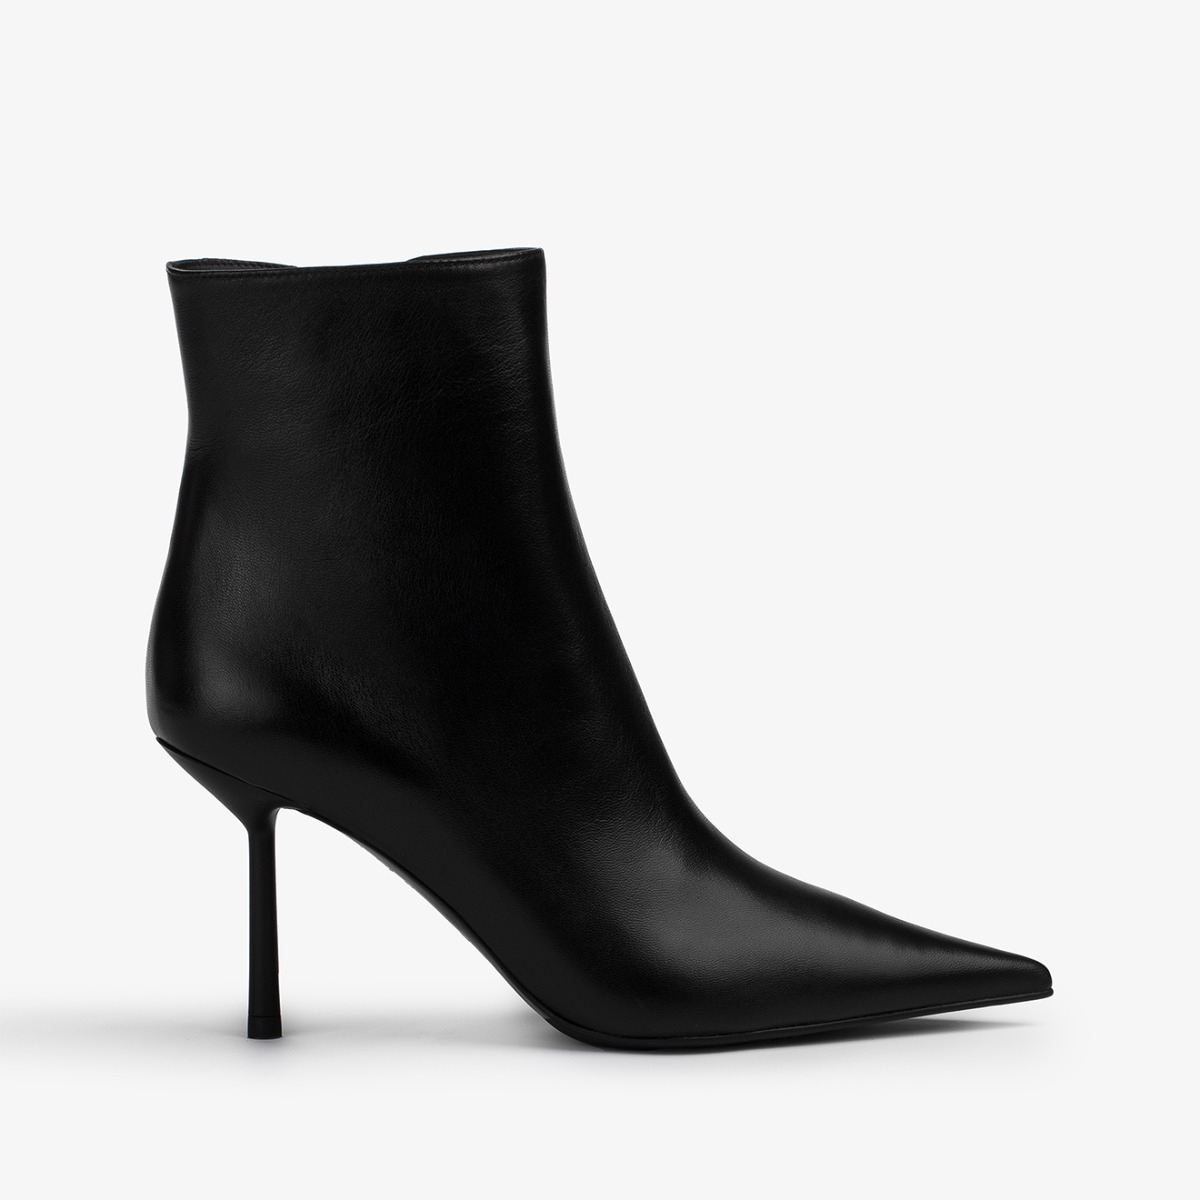 BELLA ANKLE BOOT 80 mm - Le Silla | Official Online Store